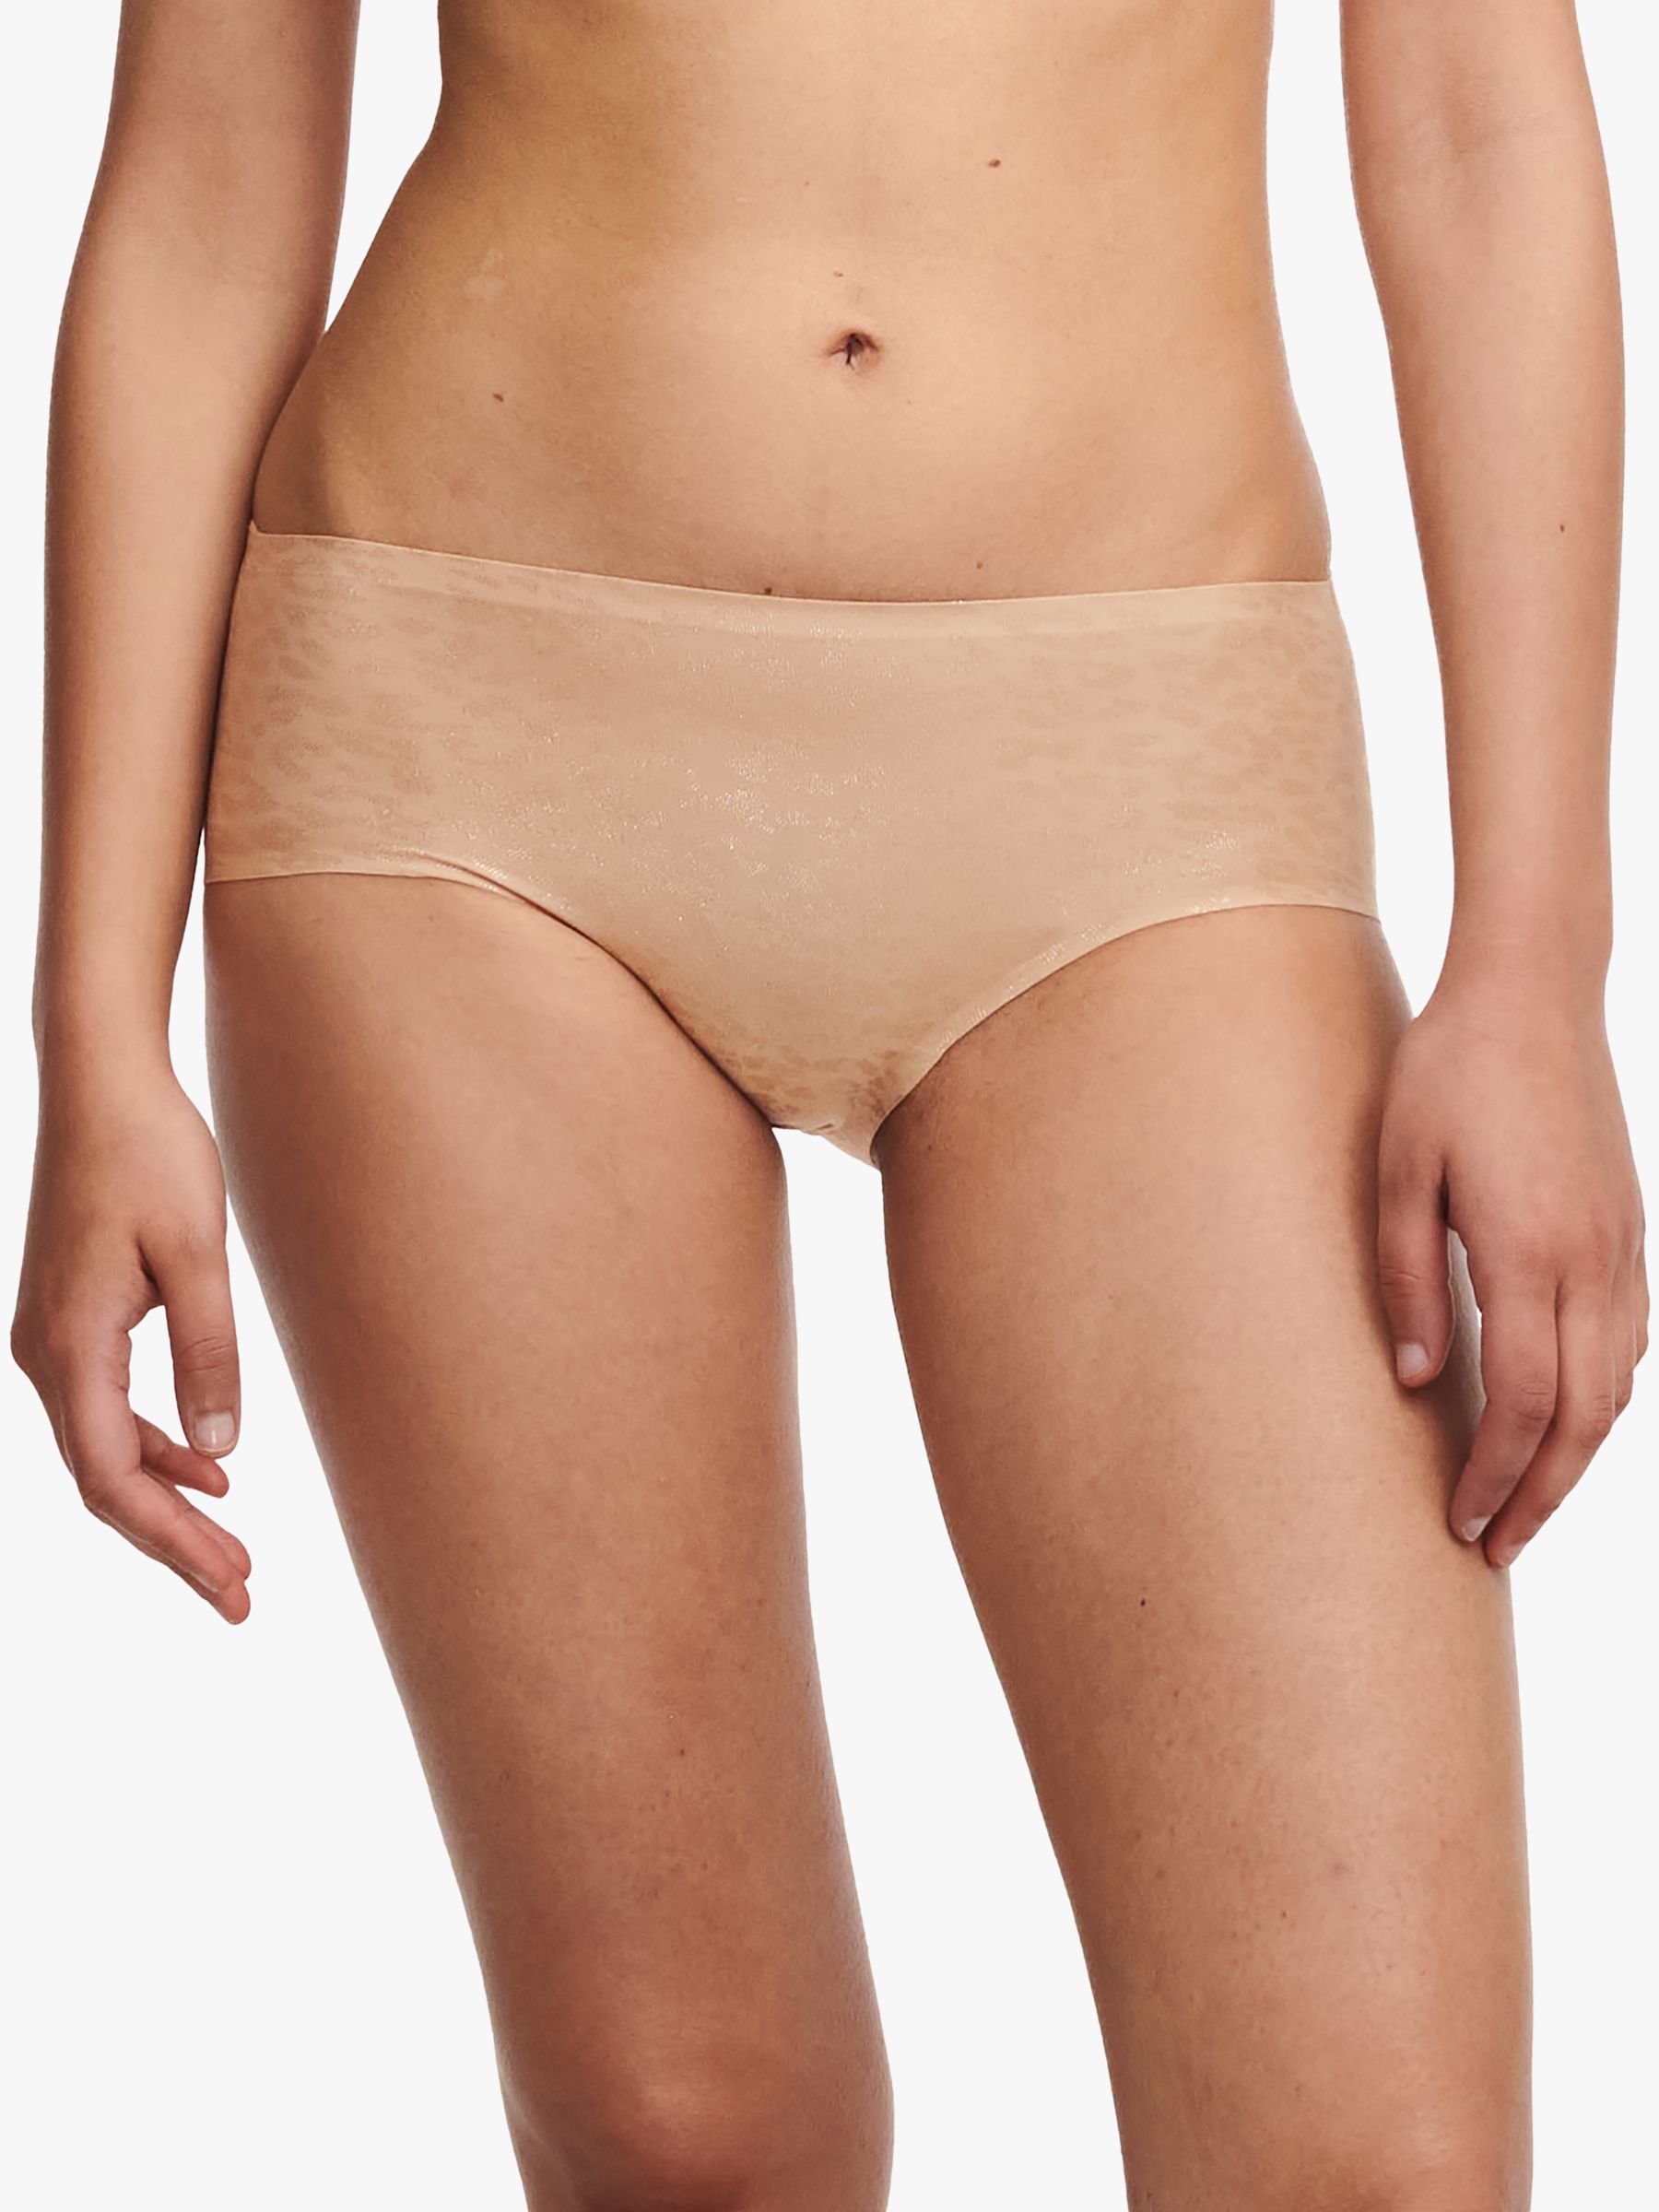 Chantelle Soft Stretch Hipster Knickers, Shimmer, One Size